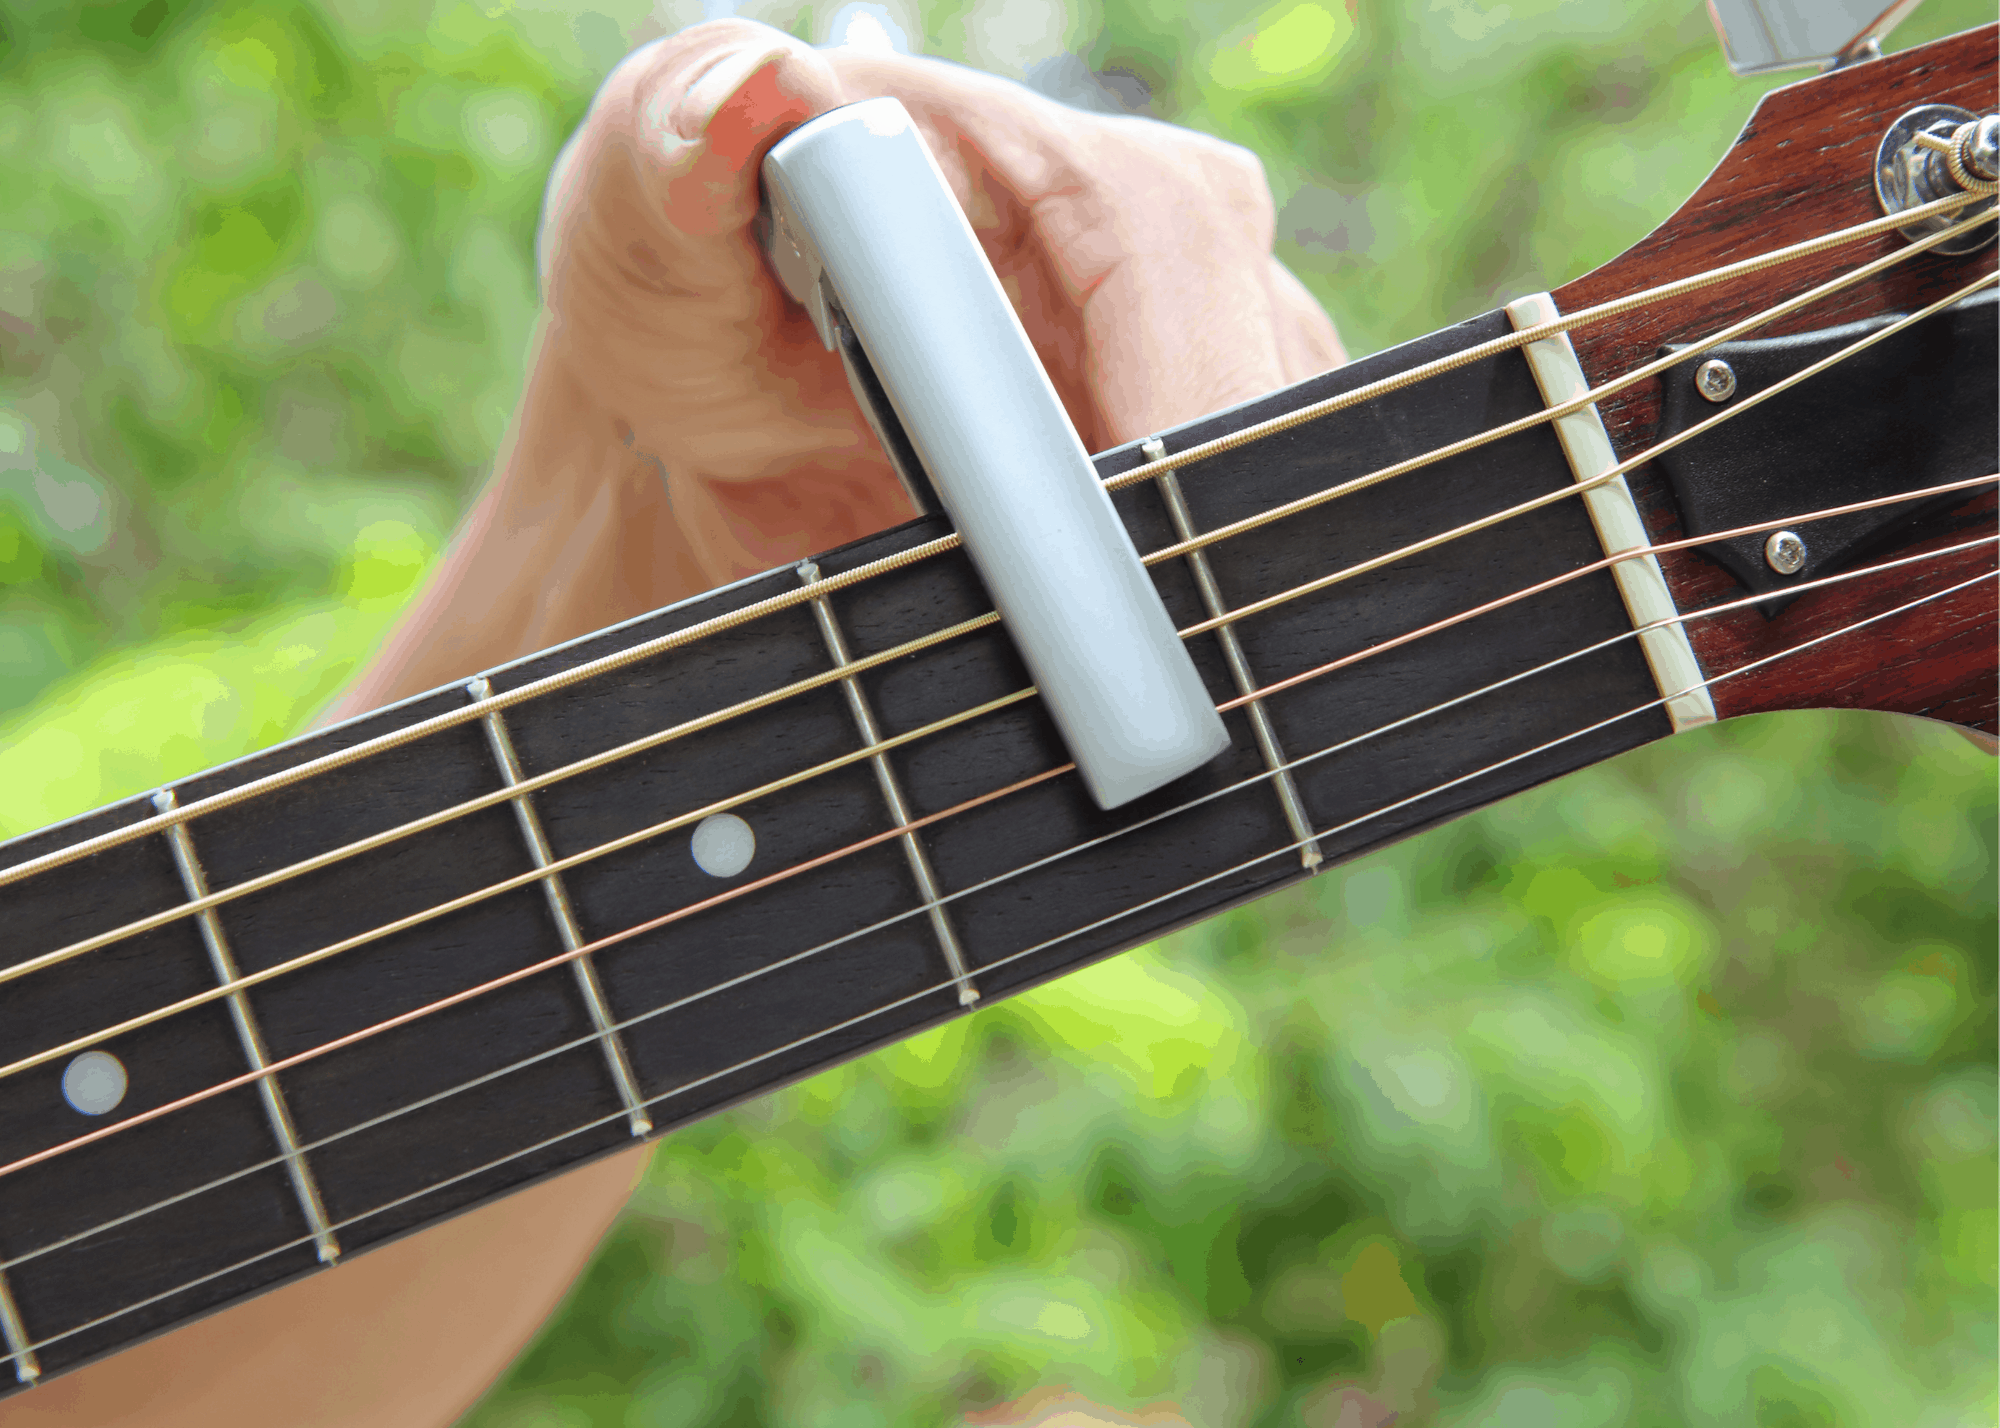 changing keys with a capo exercises